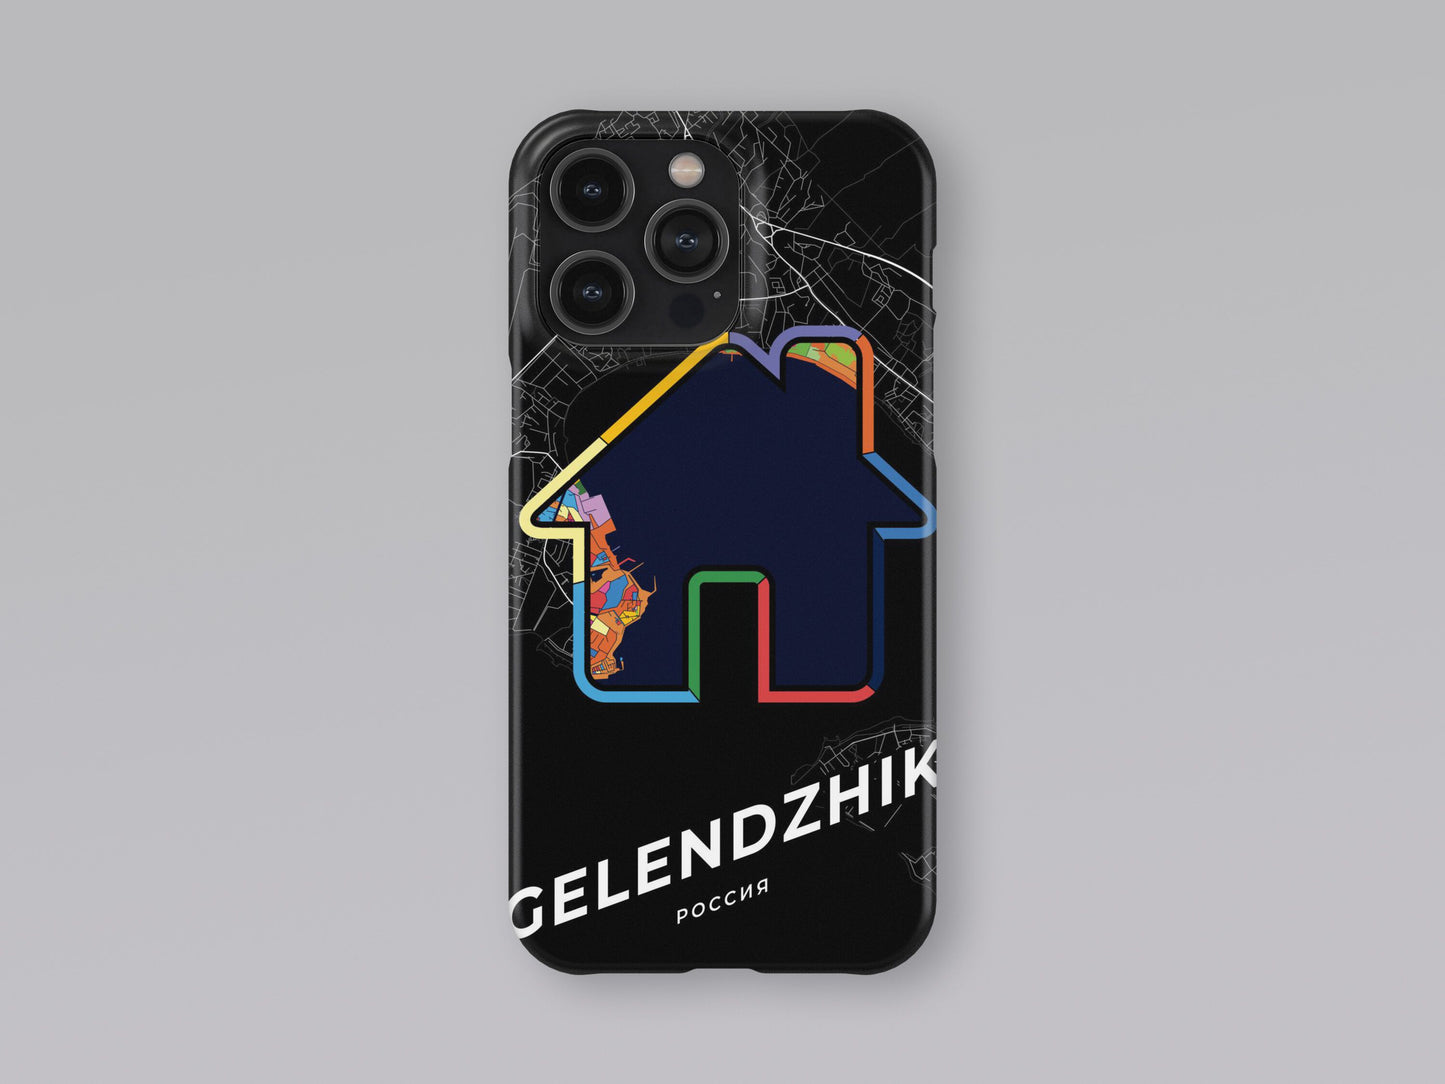 Gelendzhik Russia slim phone case with colorful icon. Birthday, wedding or housewarming gift. Couple match cases. 3